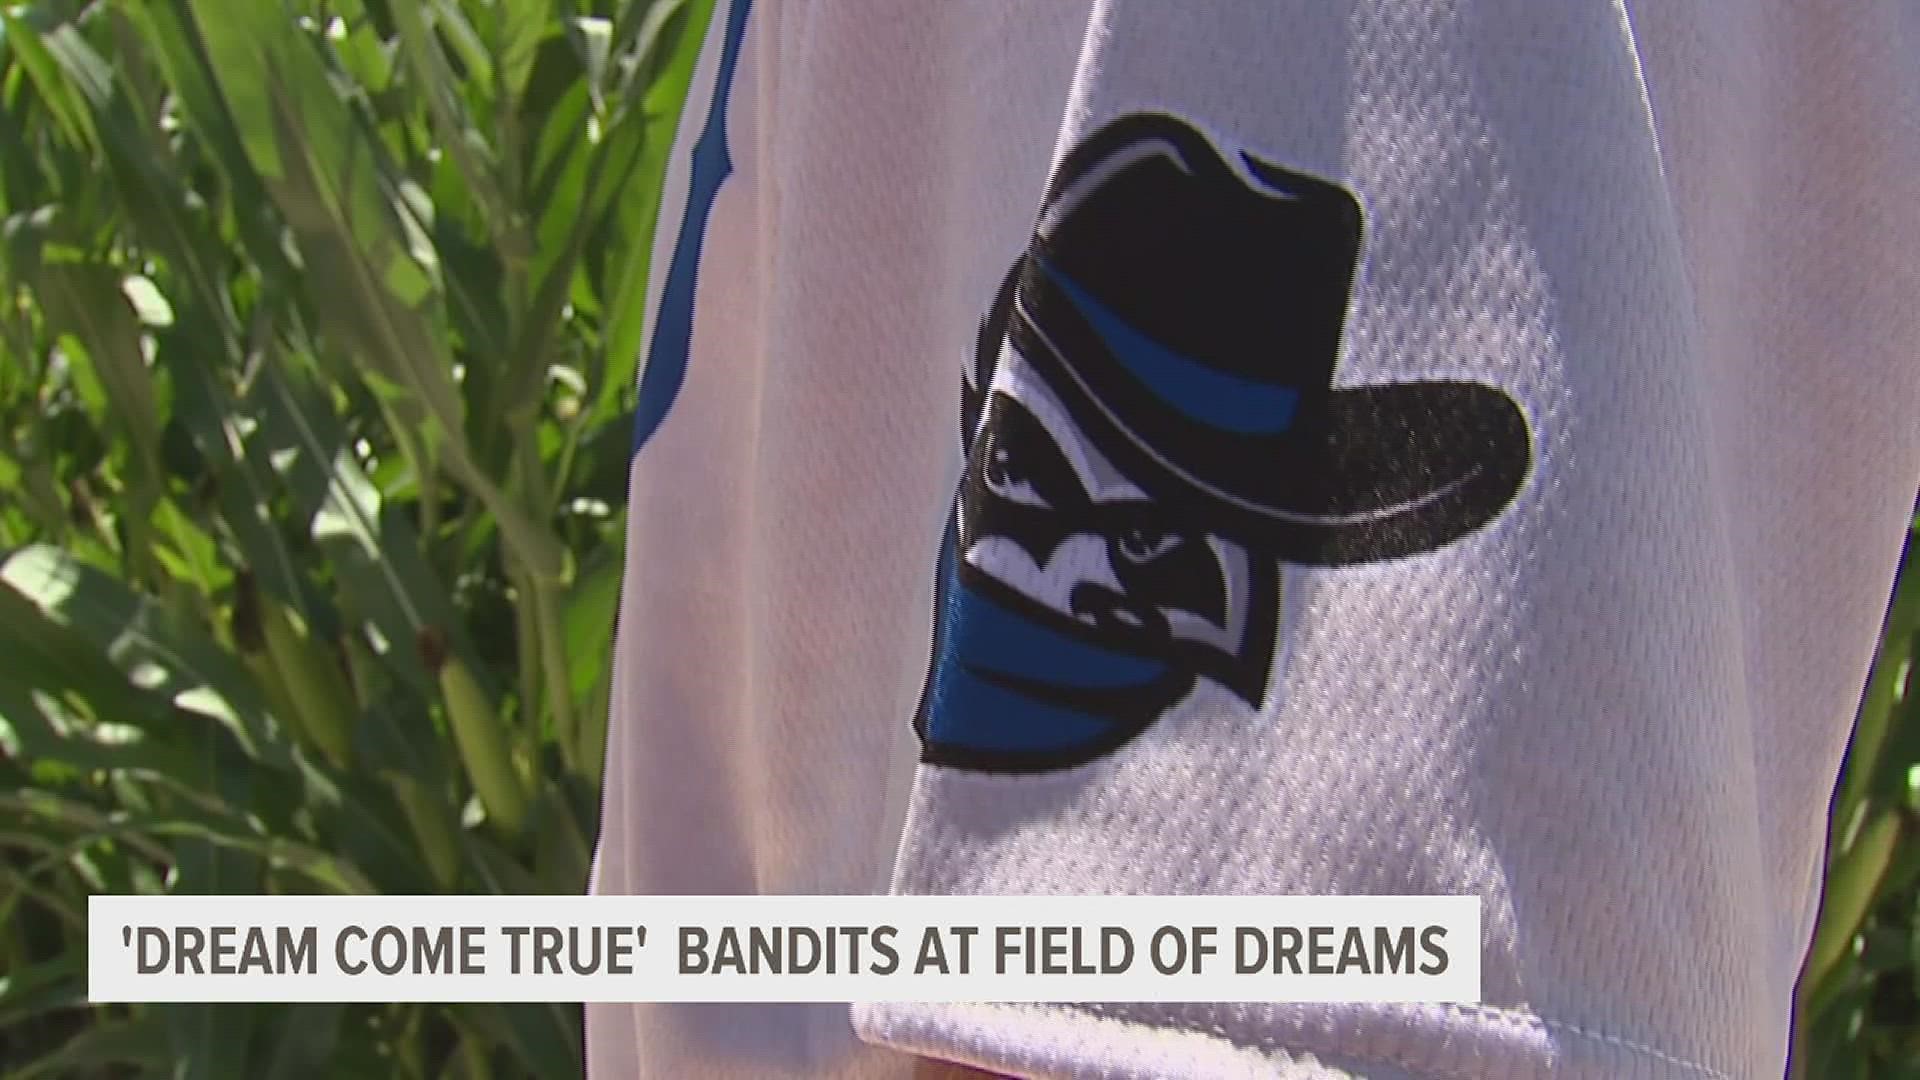 Players and fans alike enjoyed the baseball atmosphere that permeates the Field of Dreams as the River Bandits claimed victory in their game at the iconic diamond.